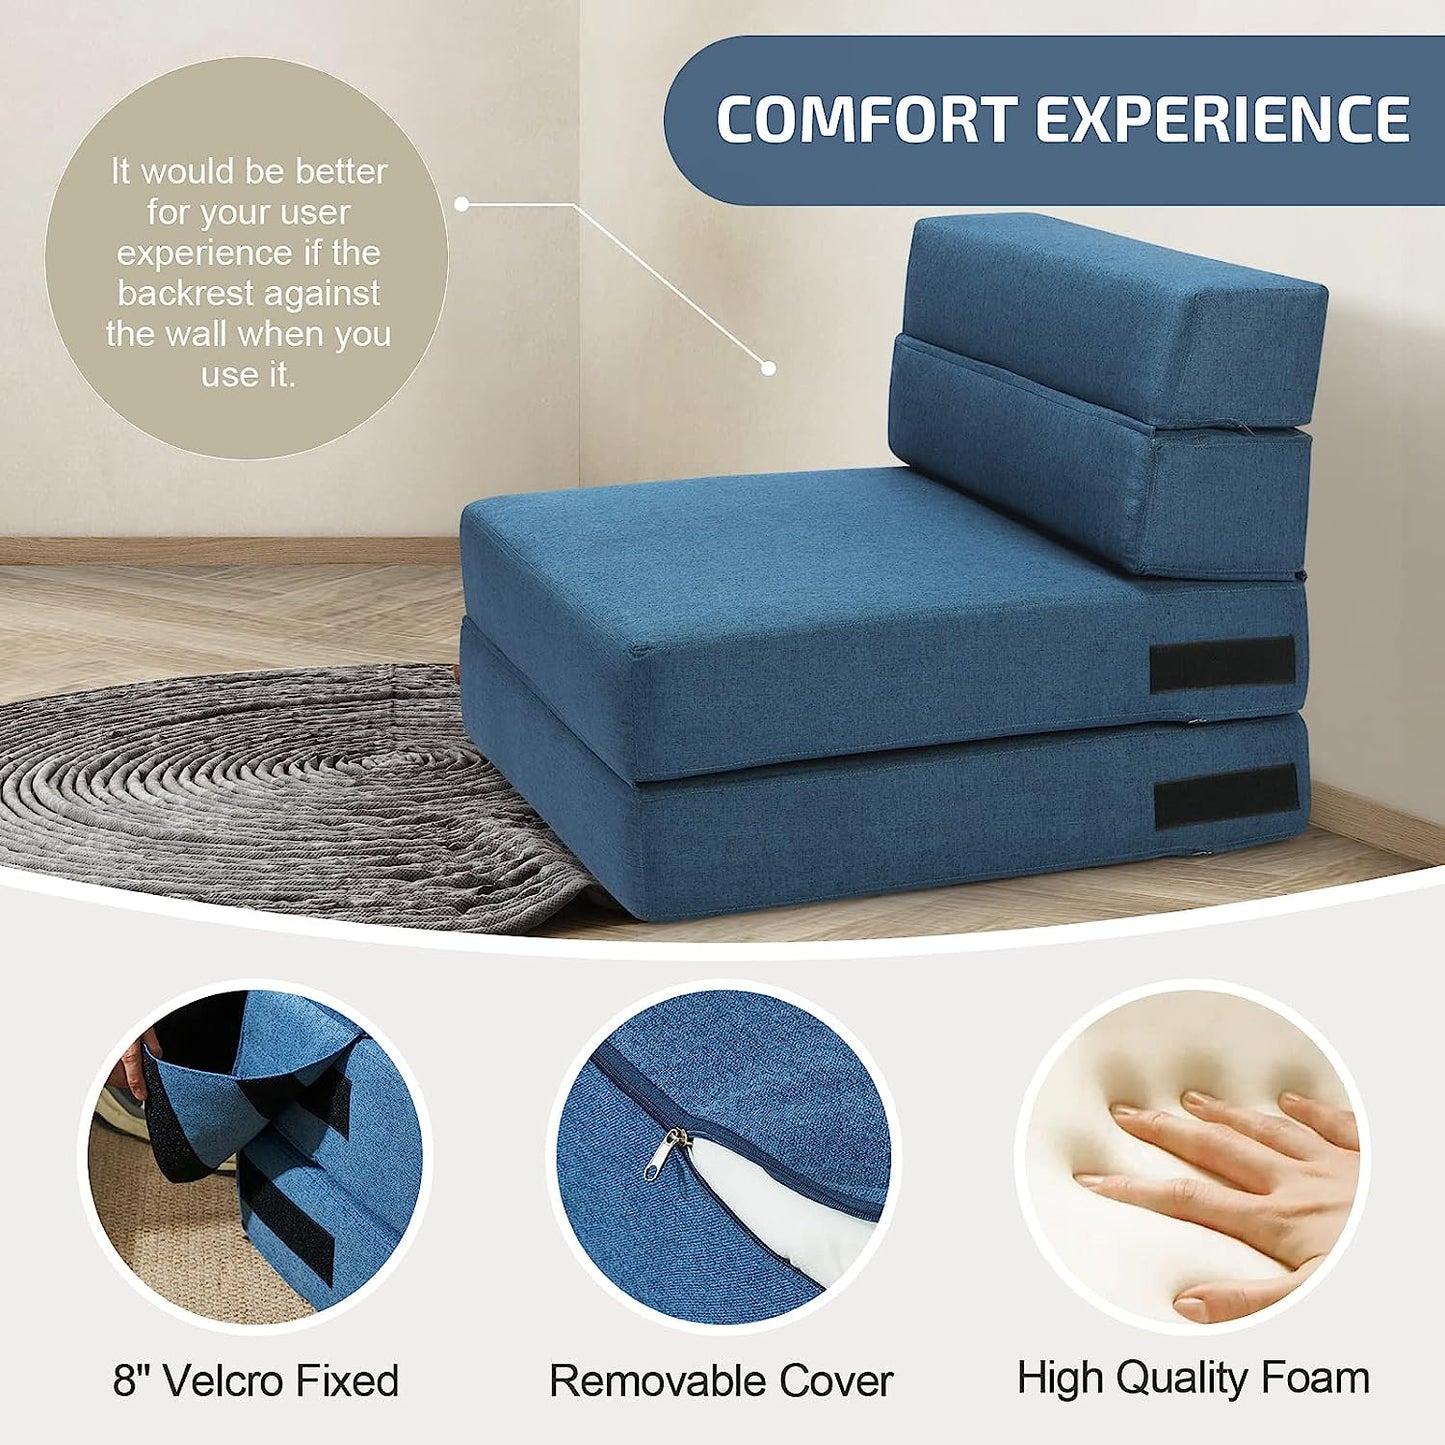 Convertible Folding Sofa Bed, Floor Couch & Sleeping Mattress, Suitable for Kids, Foldable Memory Foam Sleeper for Home t - Navy Blue